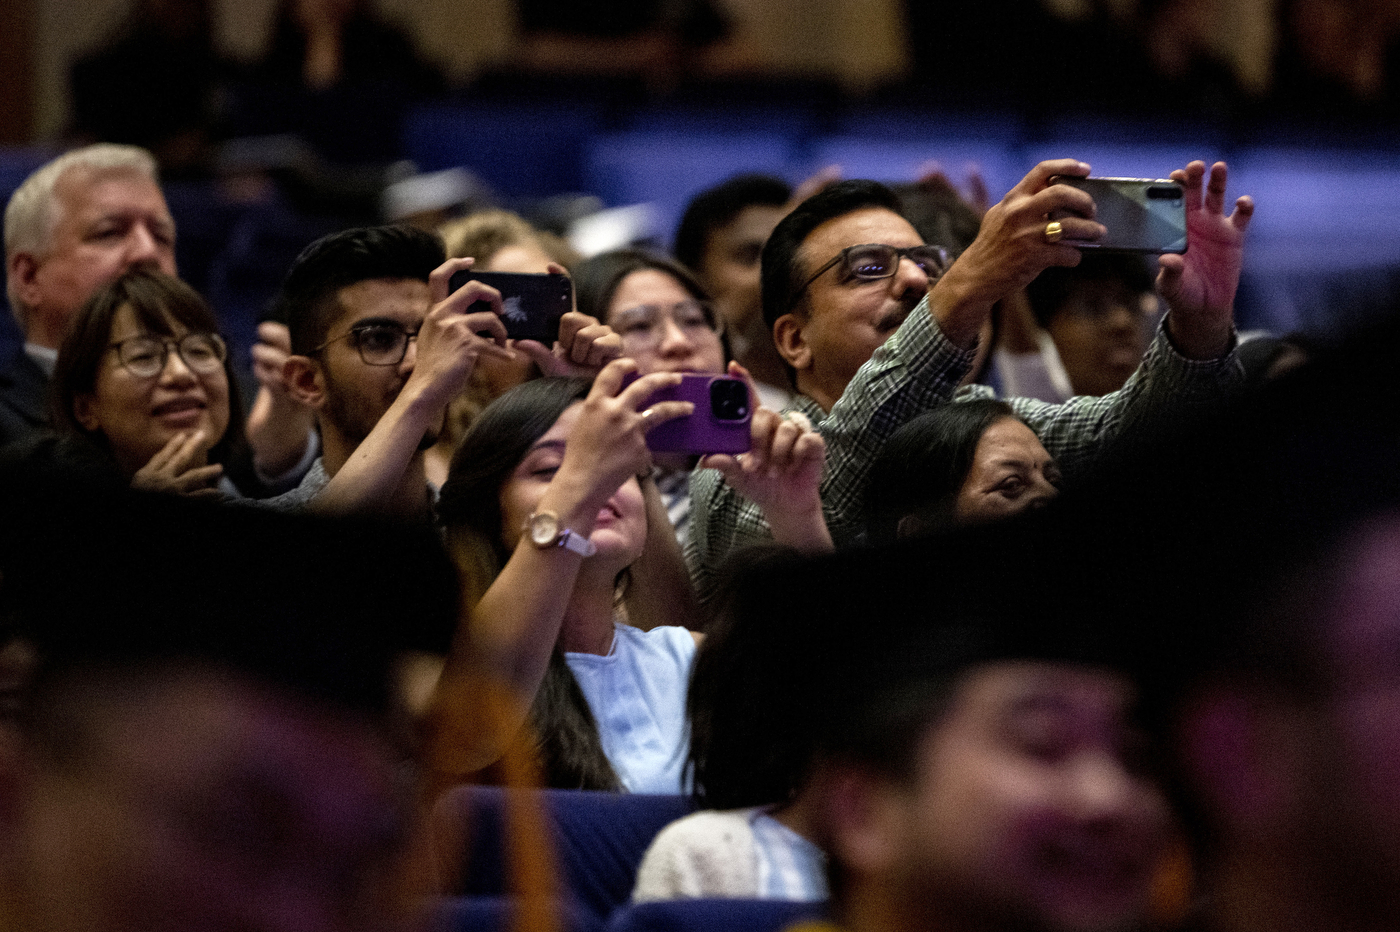 audience members taking pictures with their phones. atVancouver convocation